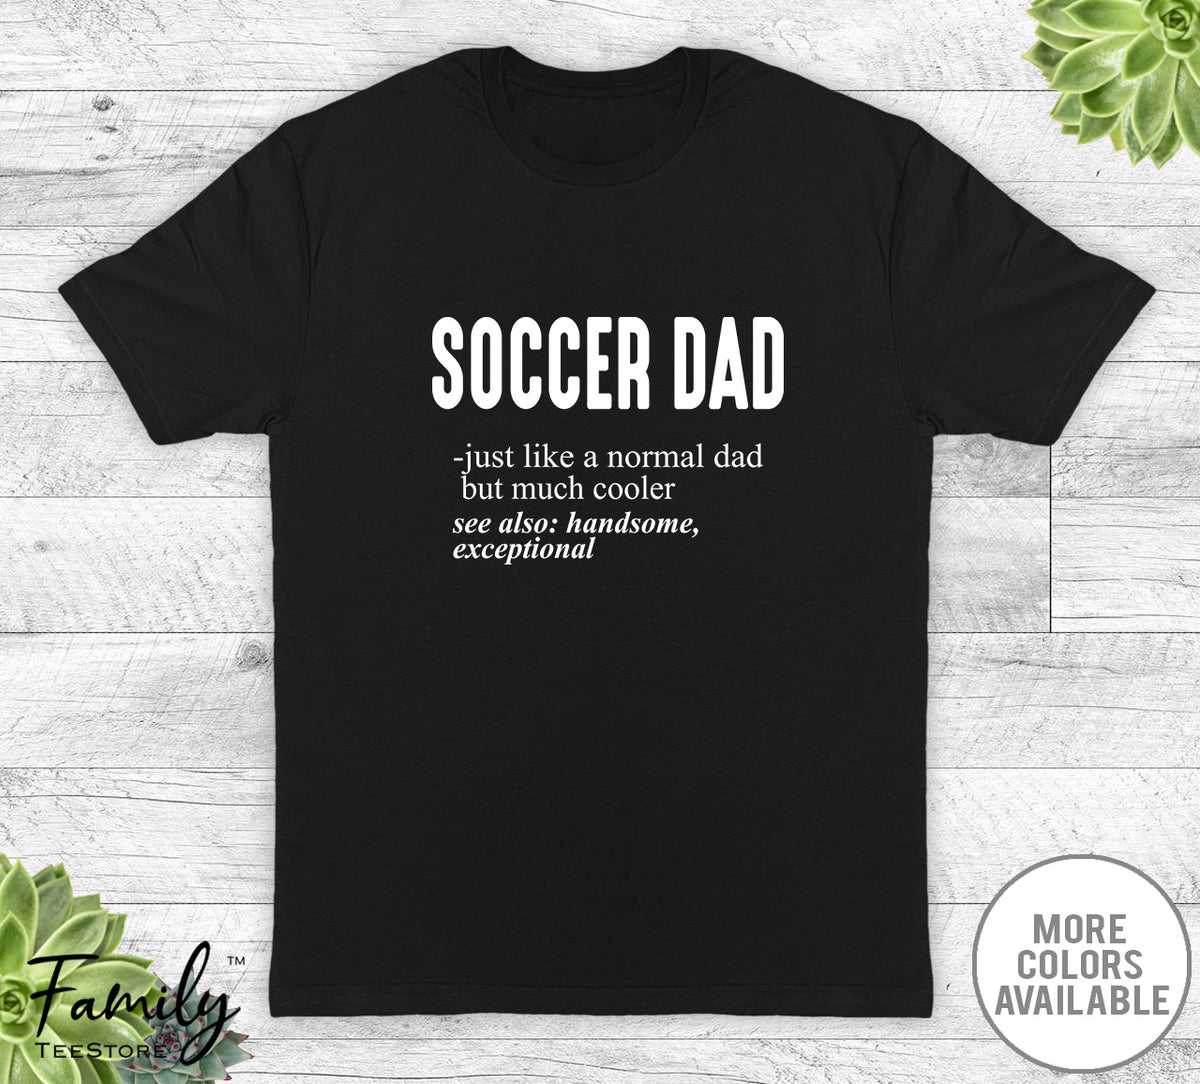 Soccer Dad Just Like A Normal Dad - Unisex T-shirt - Soccer Shirt - Soccer Dad Gift - familyteeprints